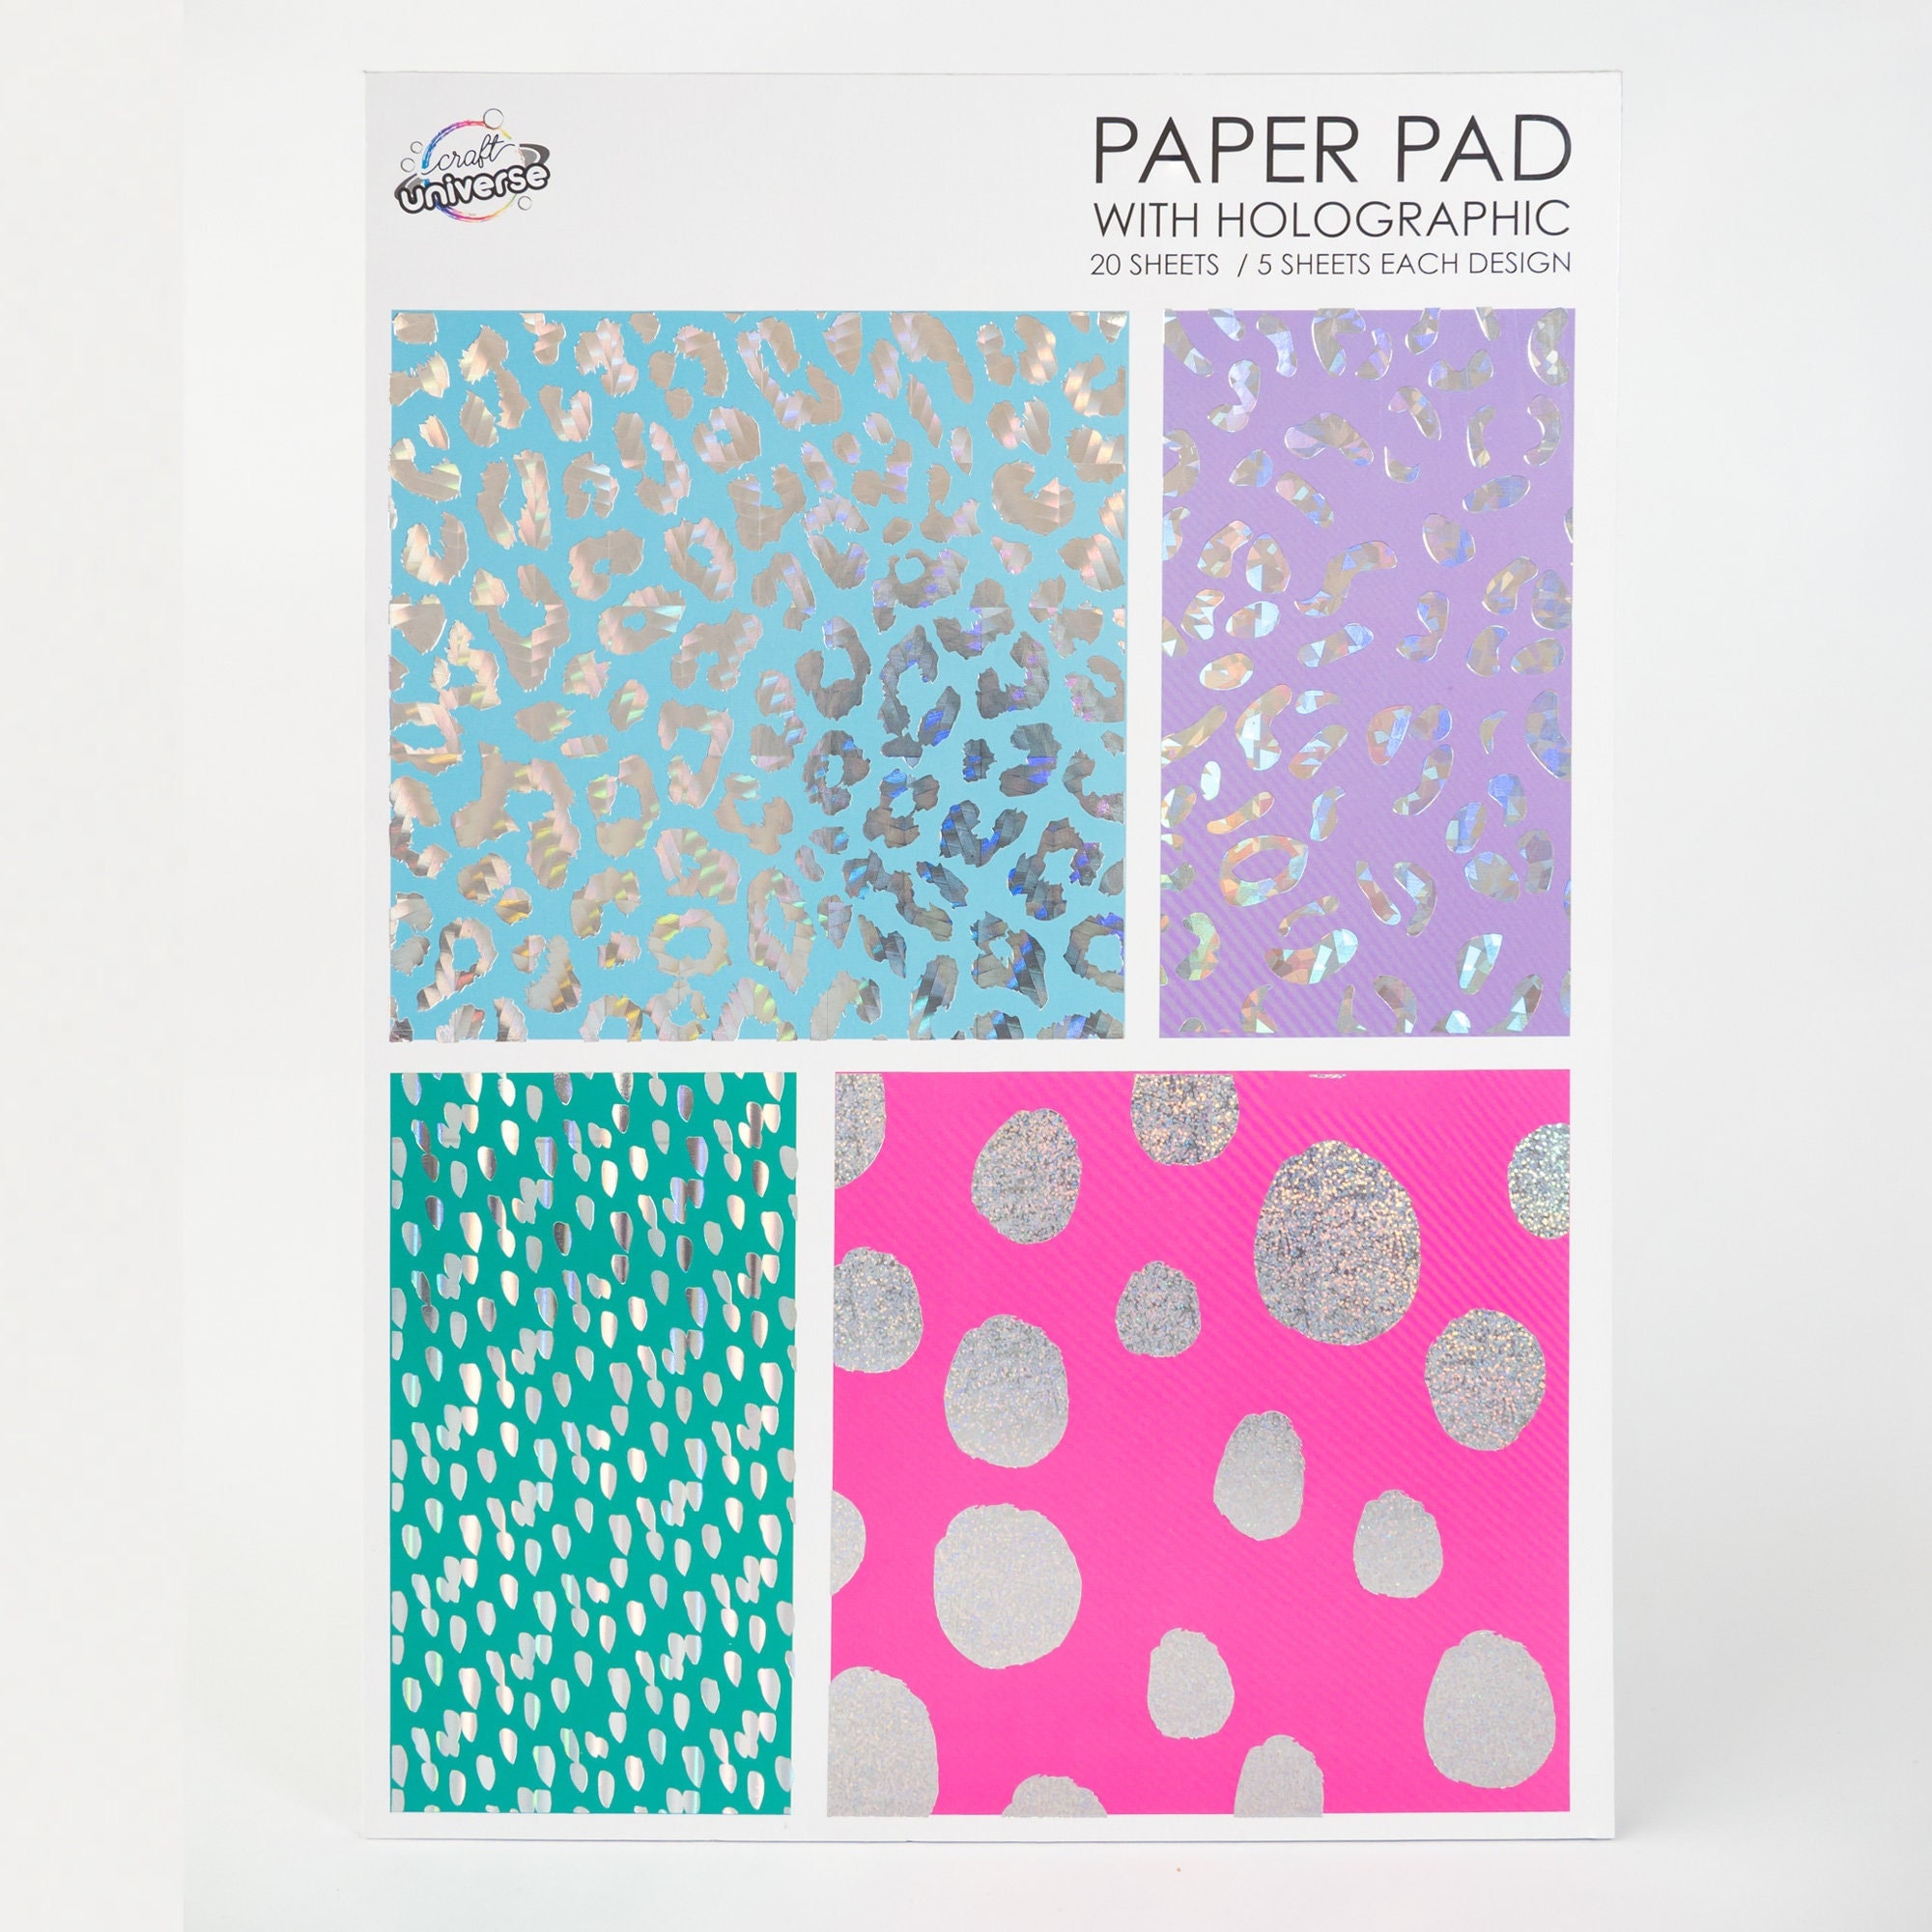 Paper Pad With Holographic 20 Sheets / 5 Sheets Each Design Craft Universe  -  Denmark